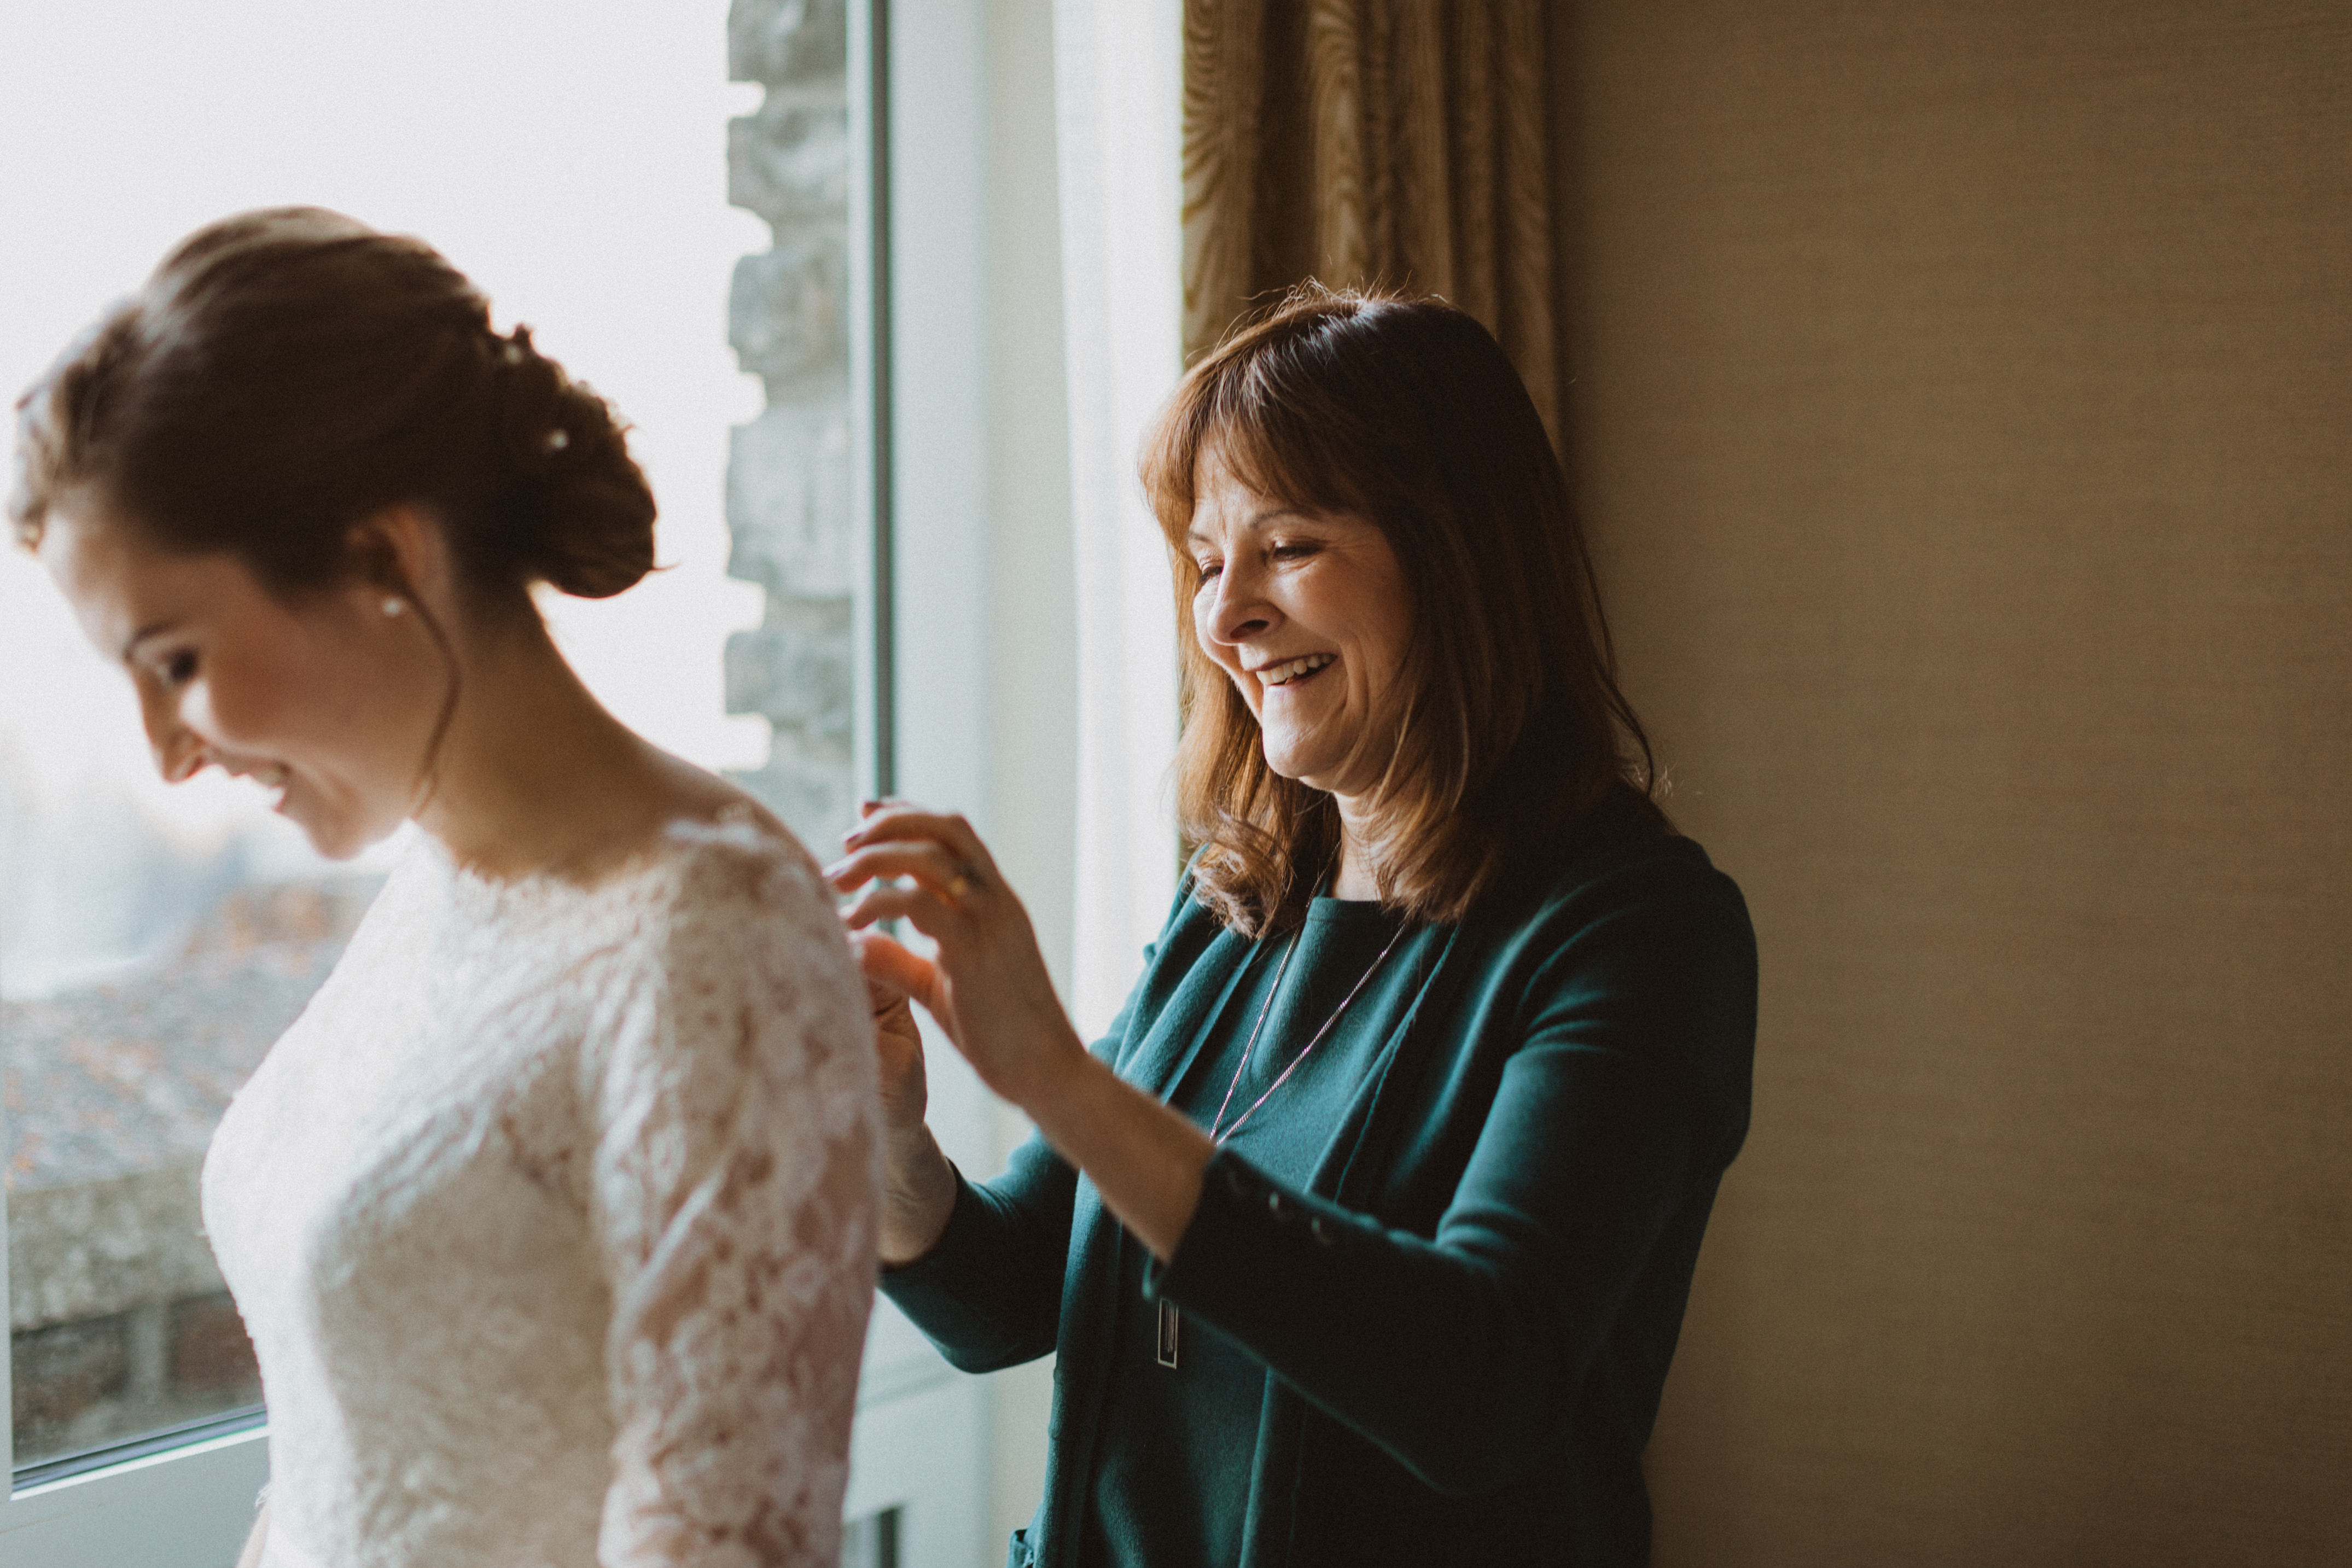 Elope with family - should you do it, pros and cons, and tips on how to involve your loved ones in your elopement day